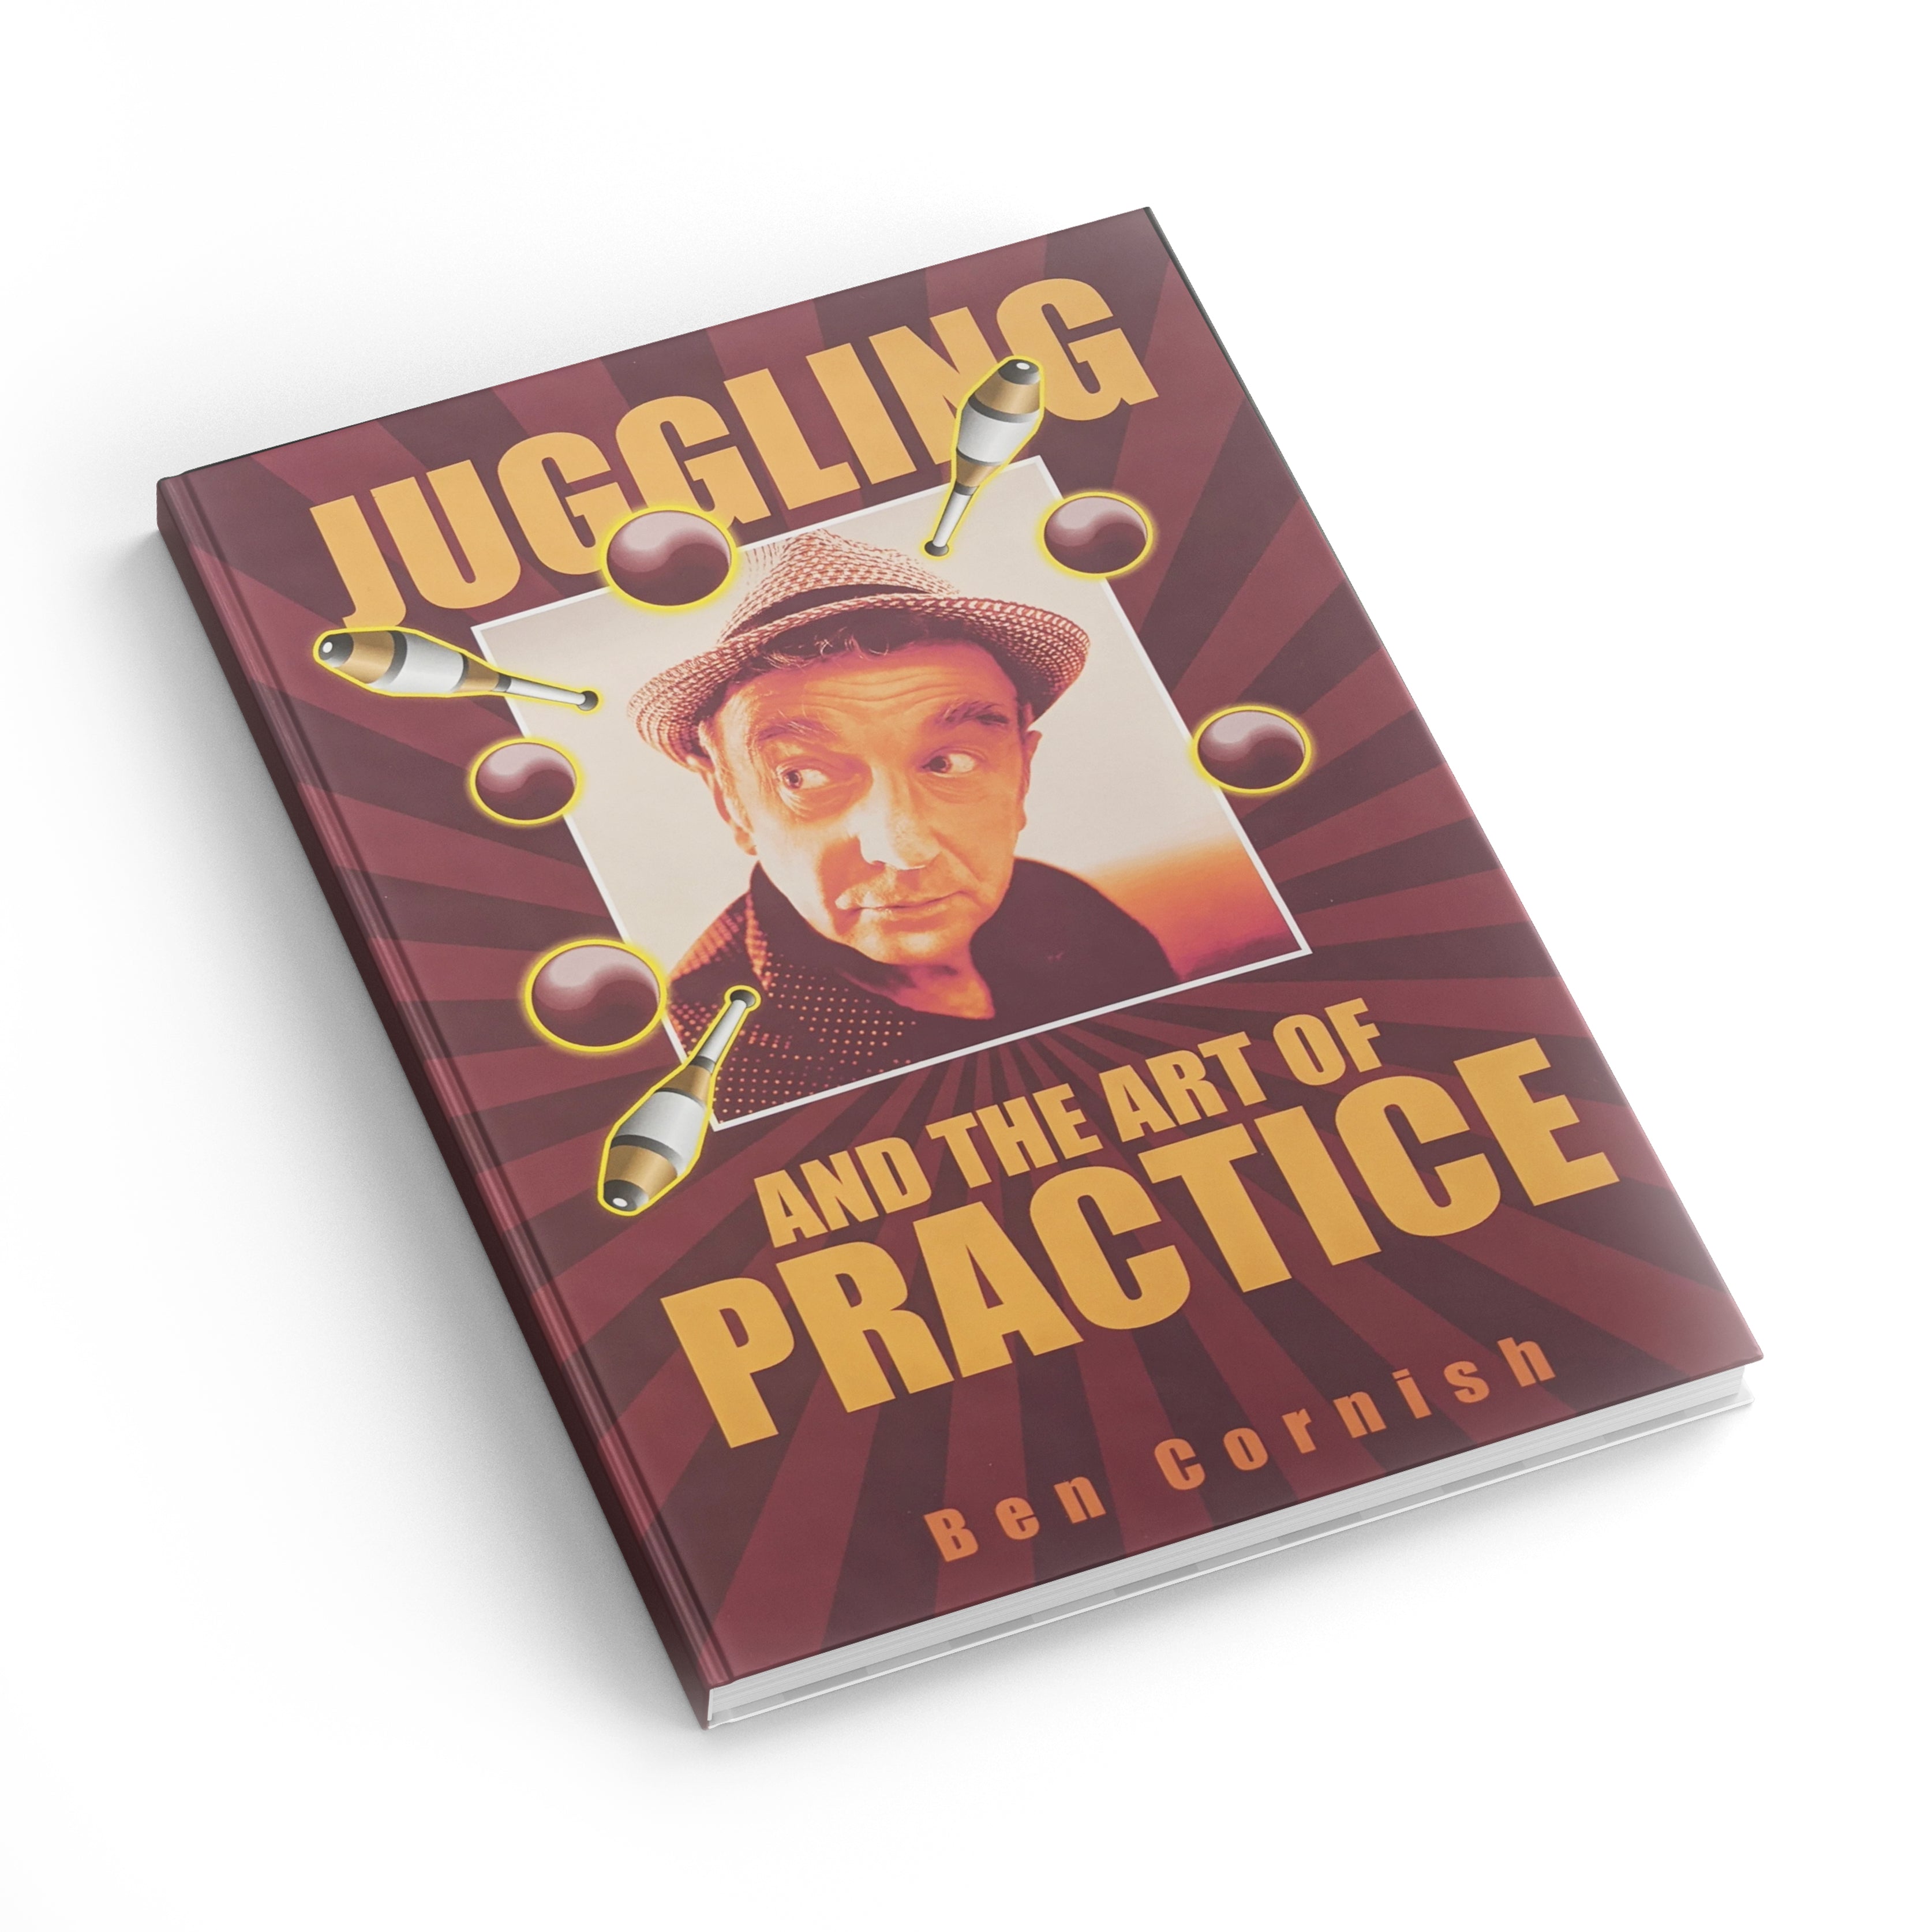 Juggling and the Art of Practice Book - Ben Cornish